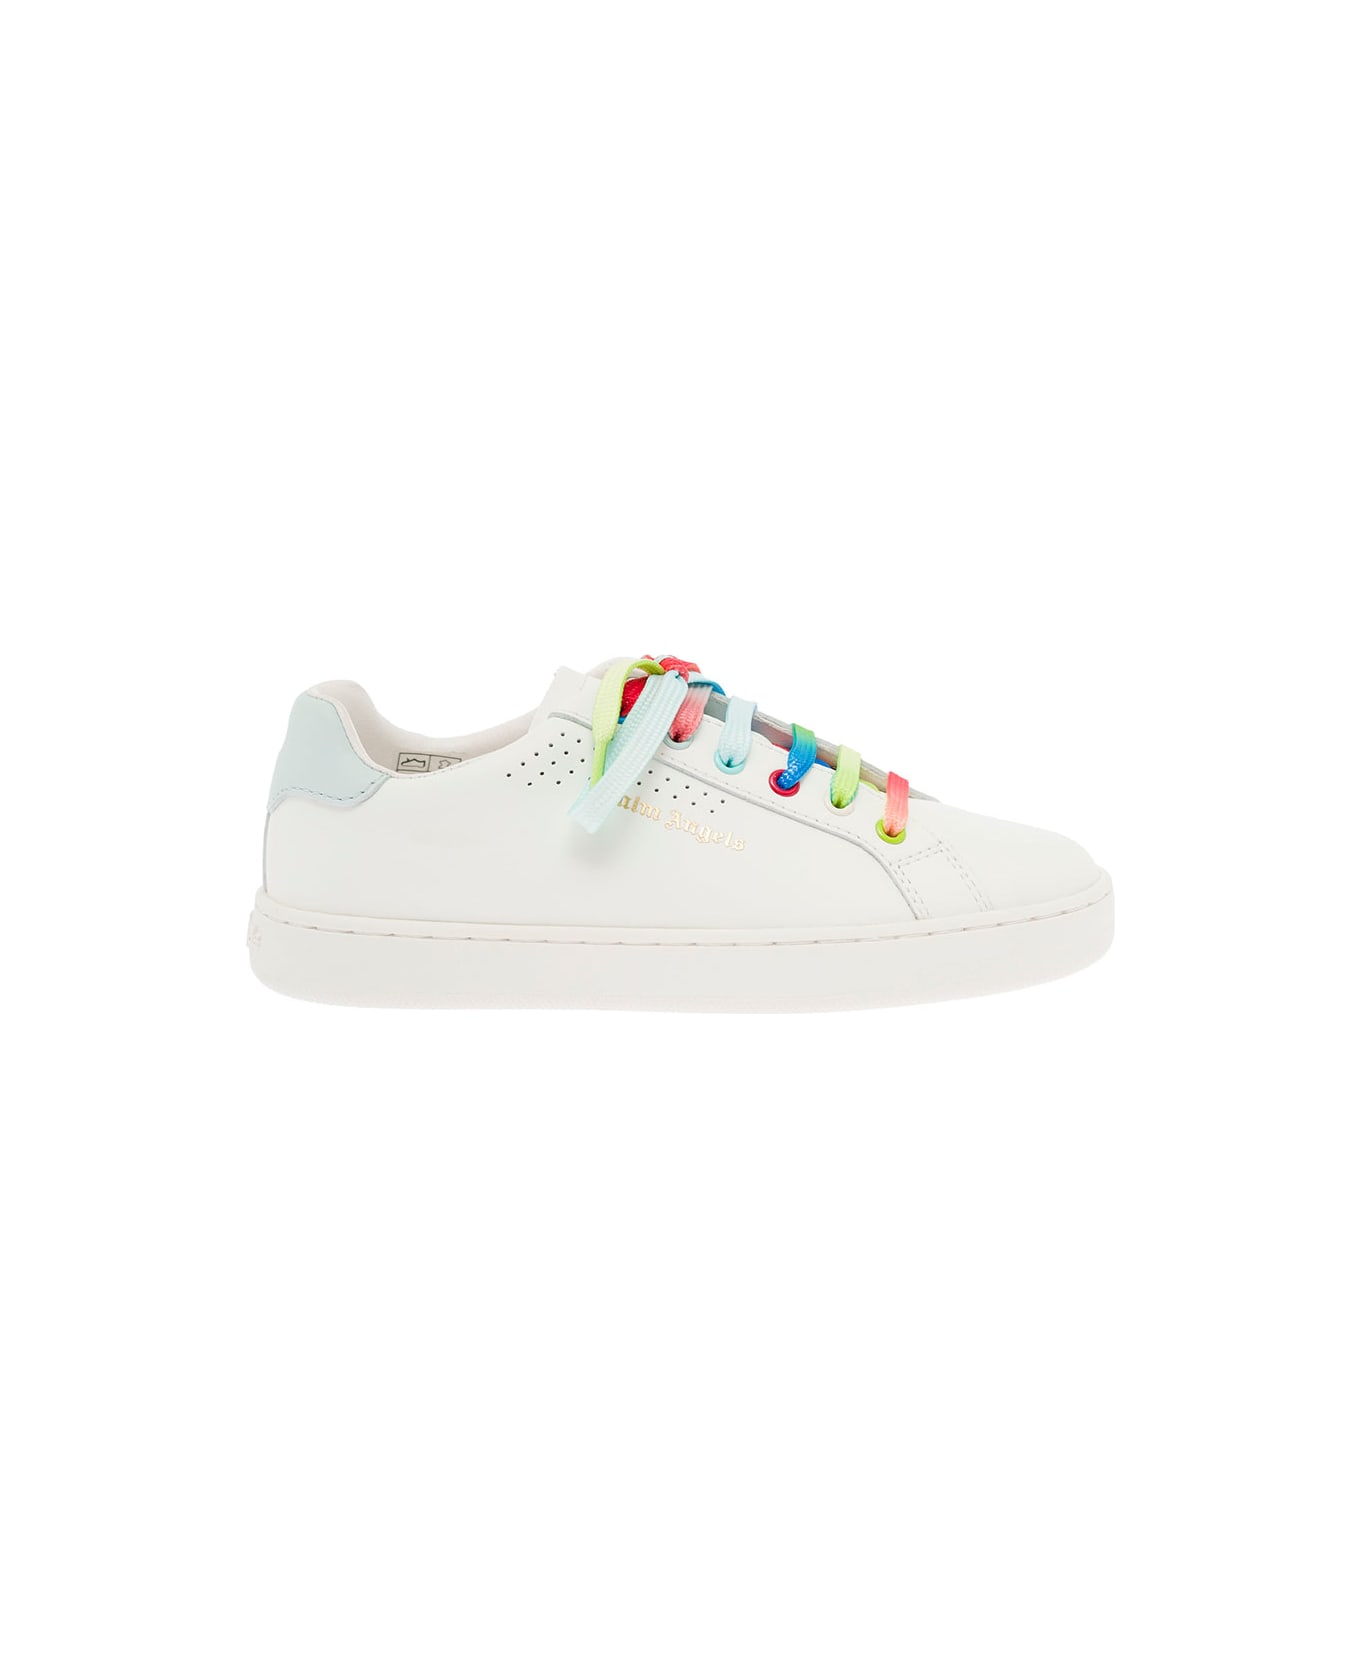 Palm Angels Kids Boy's White Leather Sneakers With Multicolor Laces - White シューズ